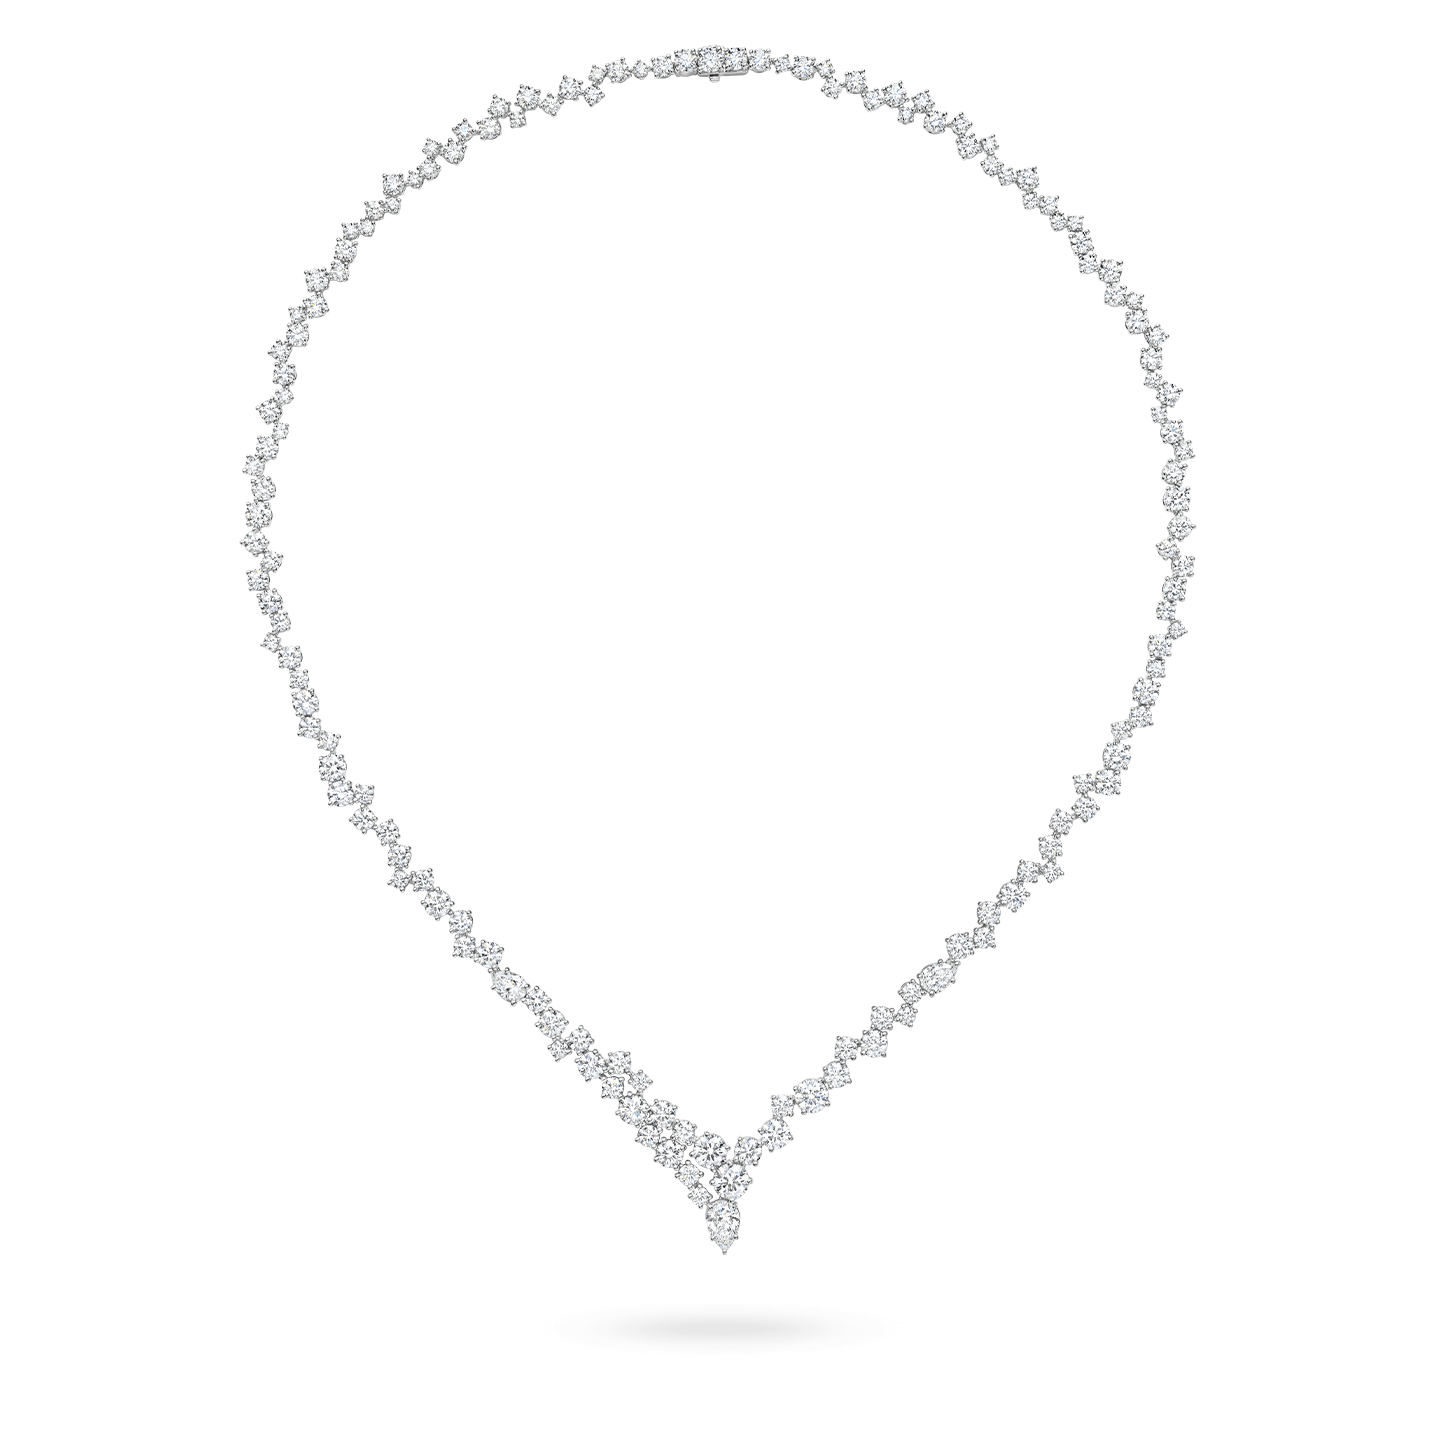 Sparkling Cluster Diamond Necklace, Product Image 1